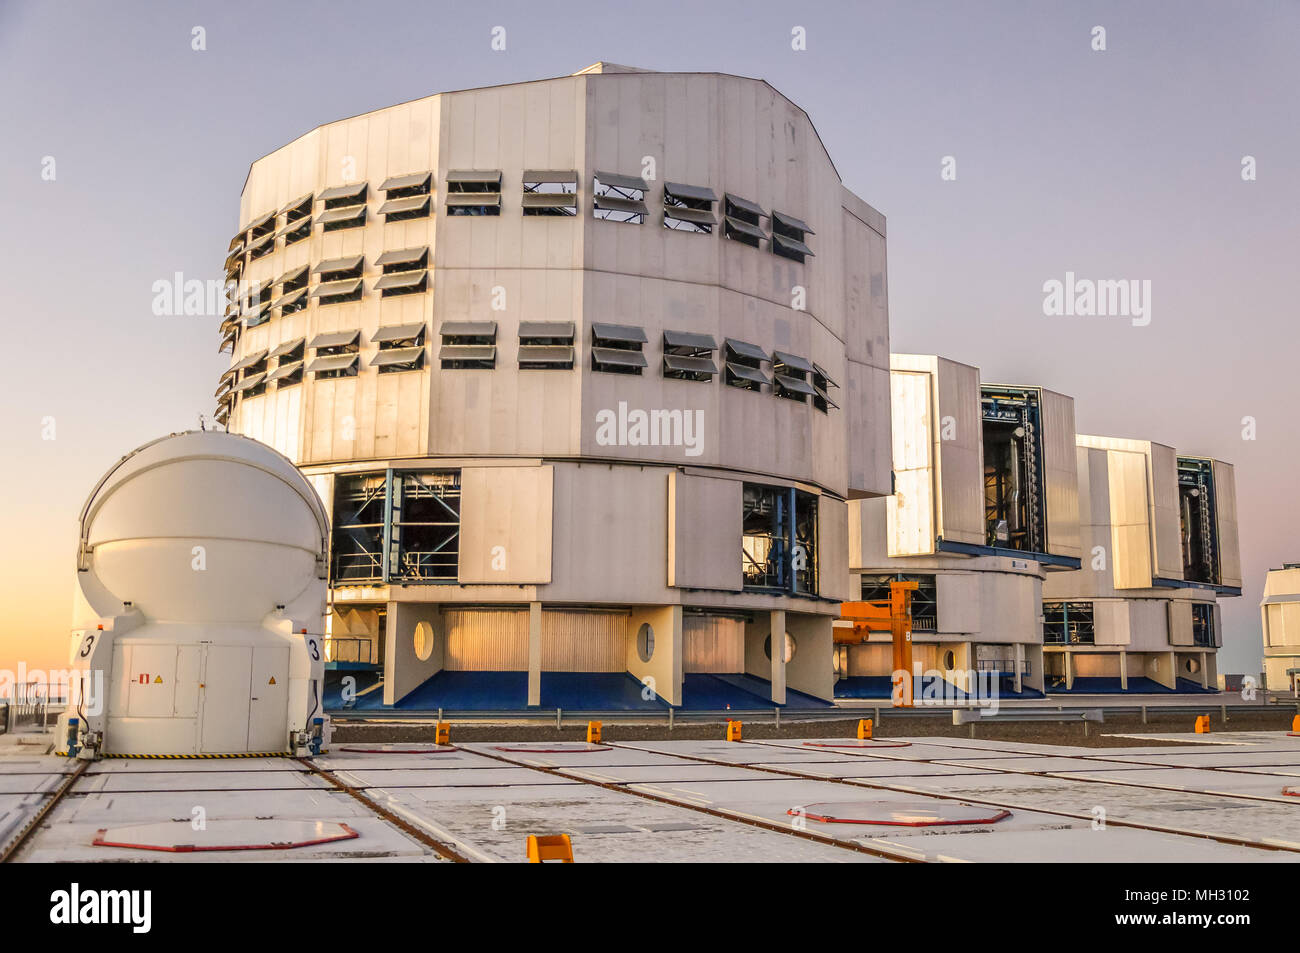 Very Large Telescope Chile High Resolution Stock Photography and Images -  Alamy